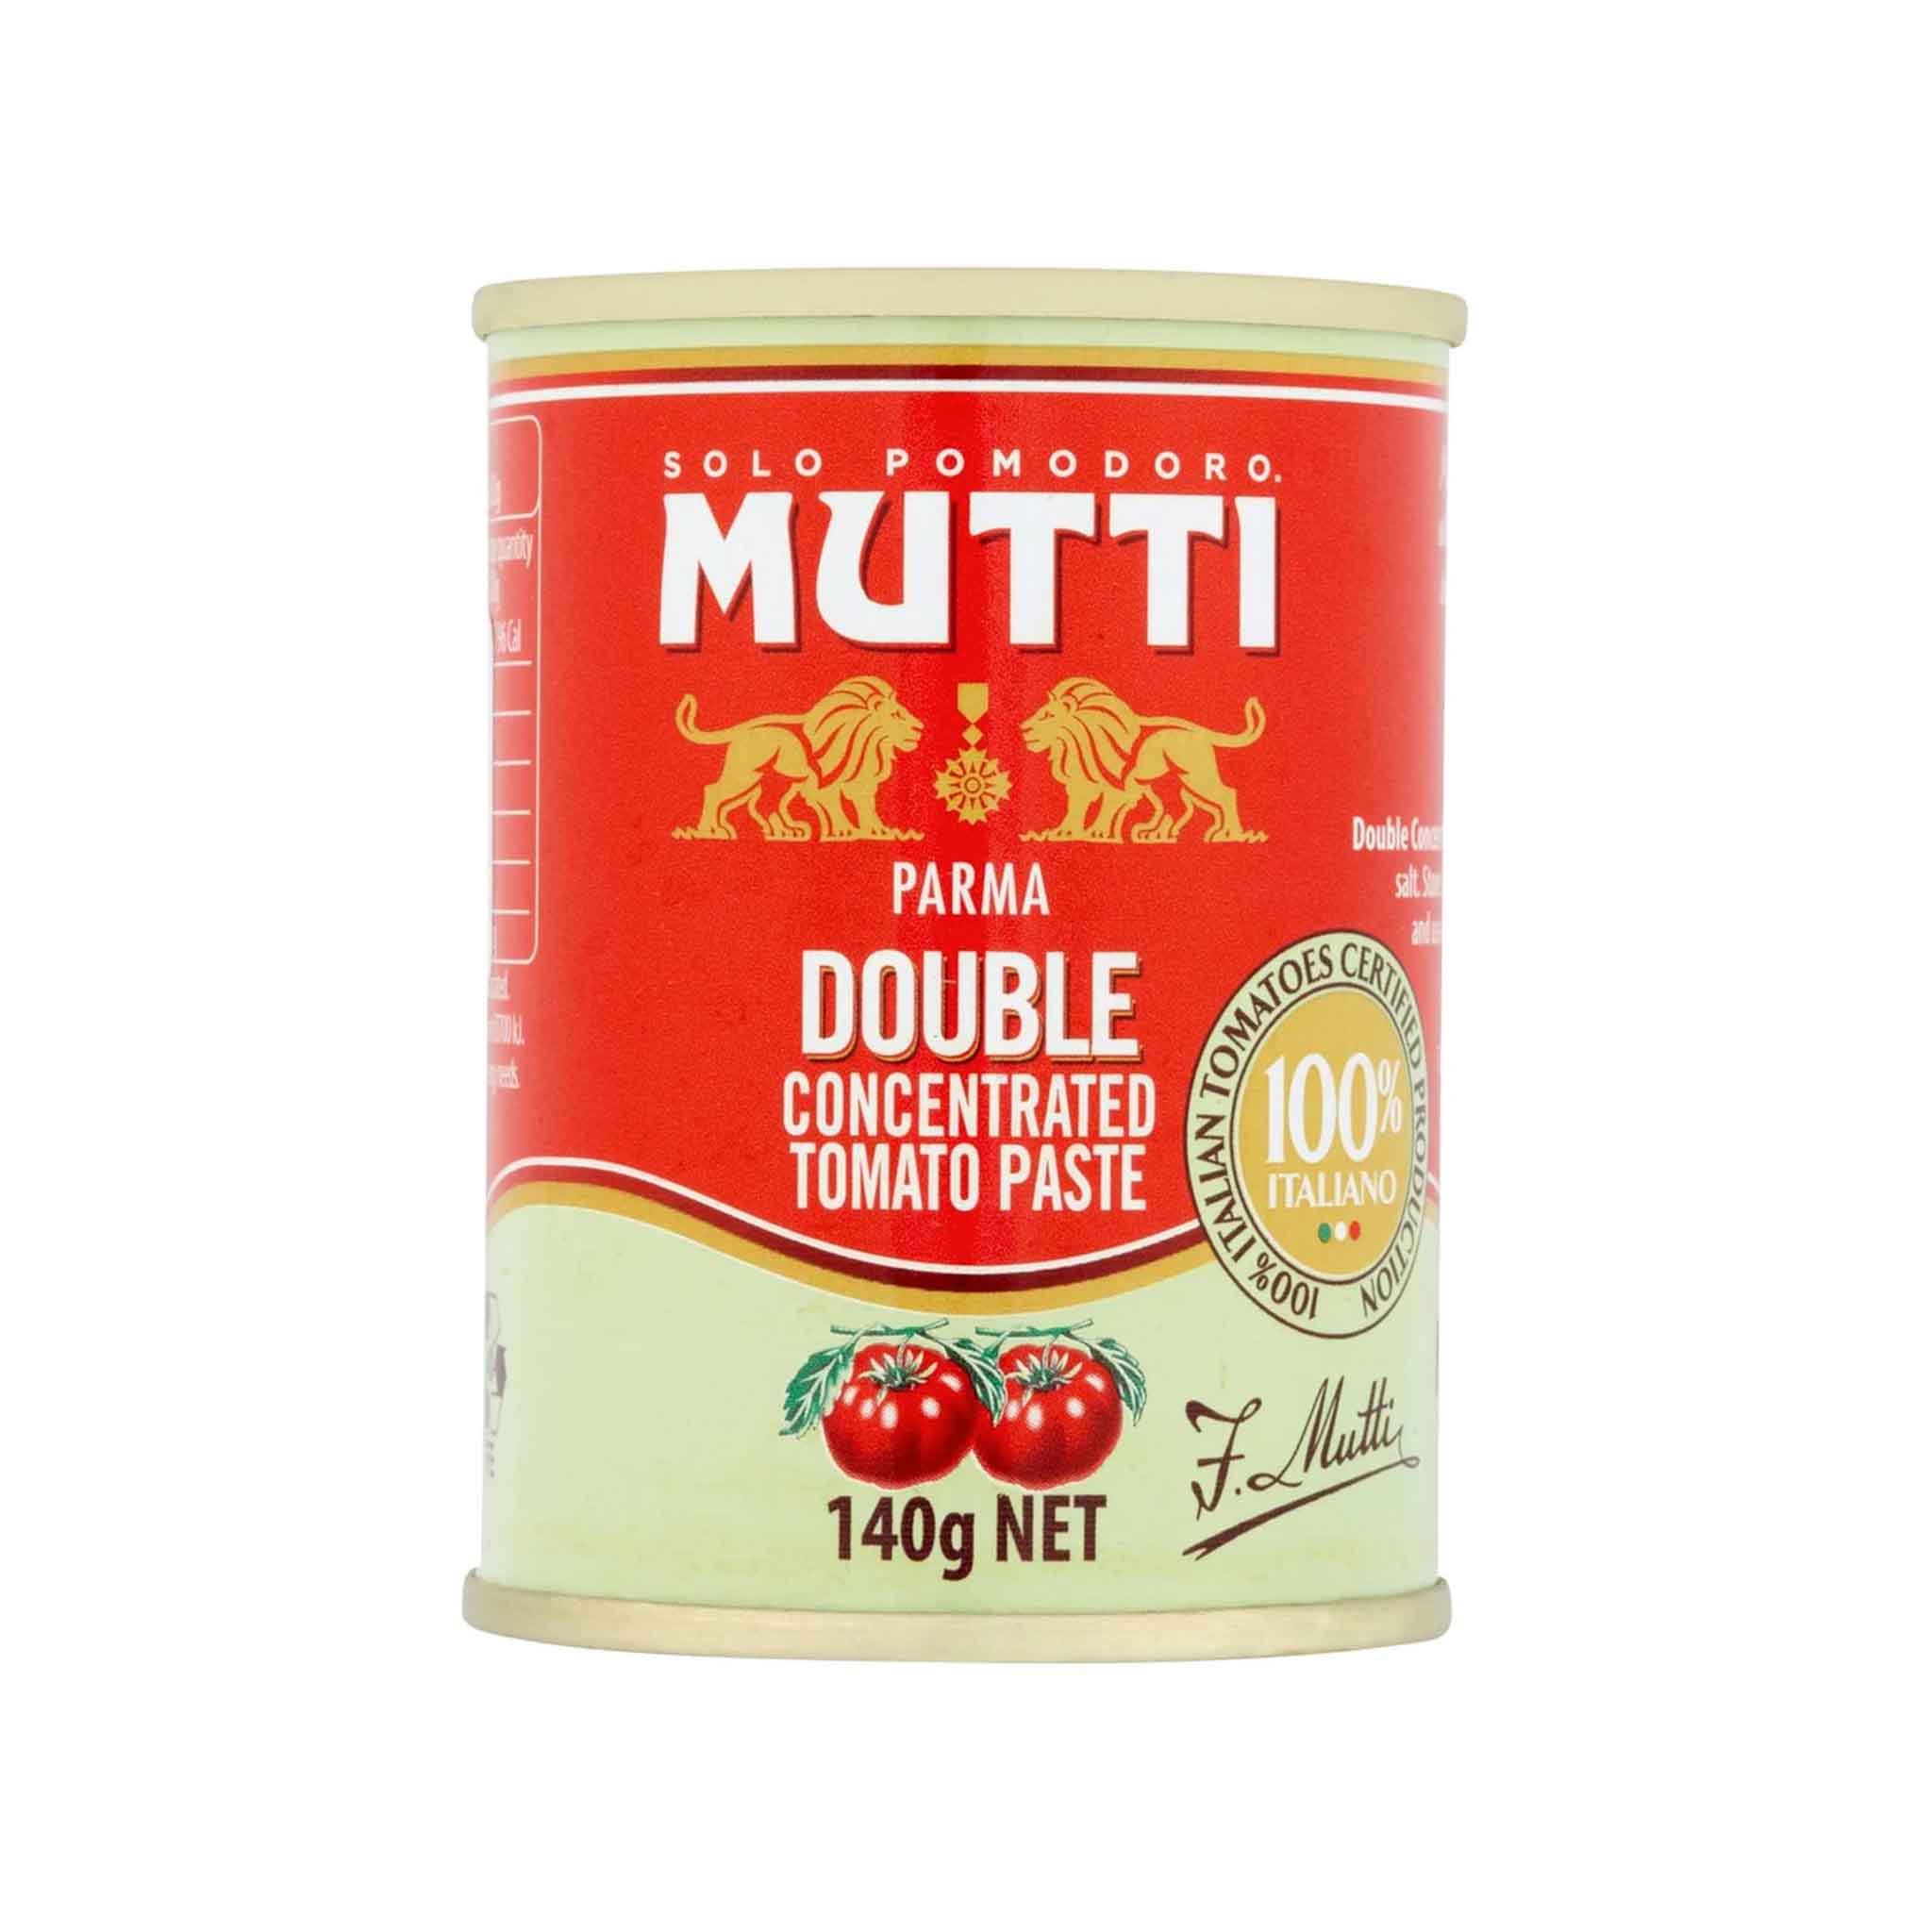 Mutti Concentrated Tomato Paste in a Can